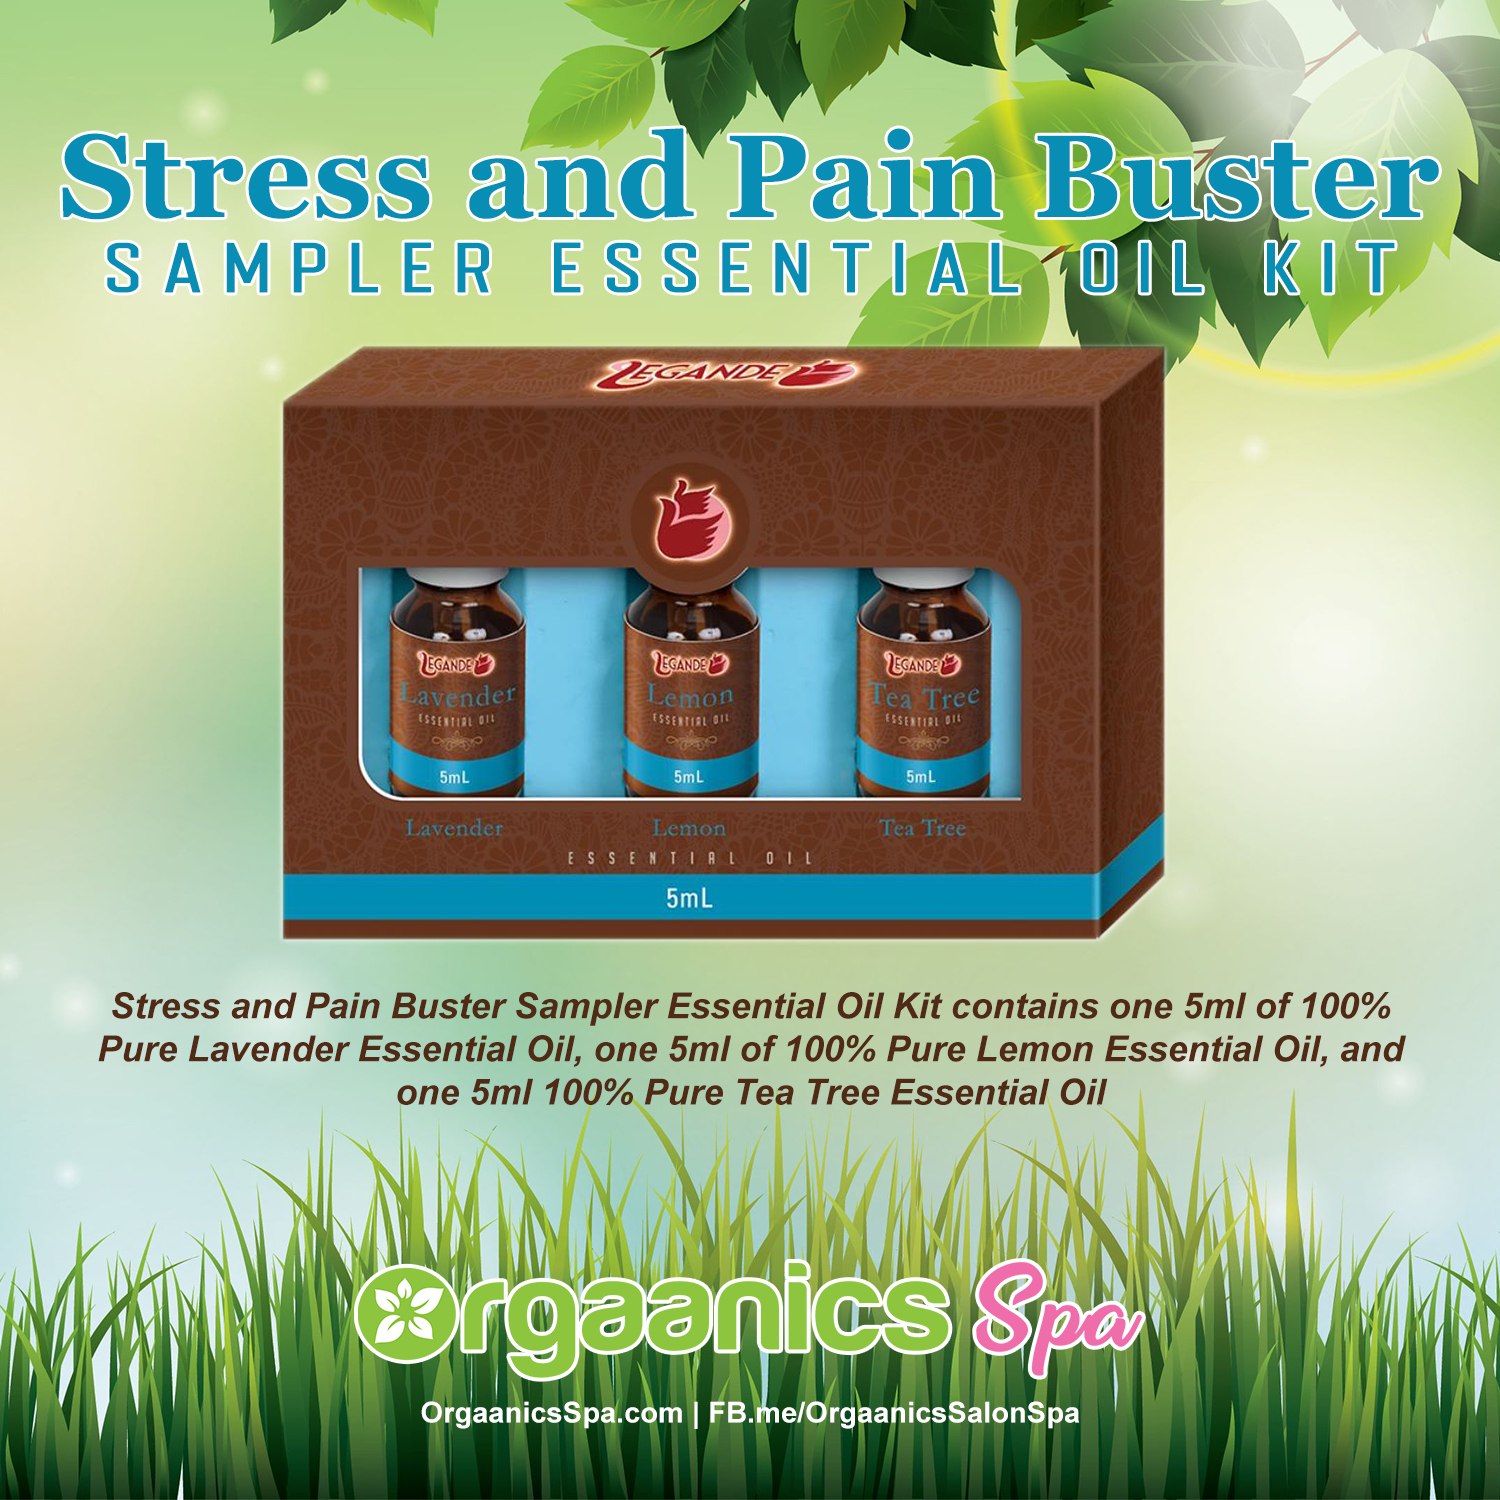 Stress and Pain Buster Sampler Essential Oil Kit